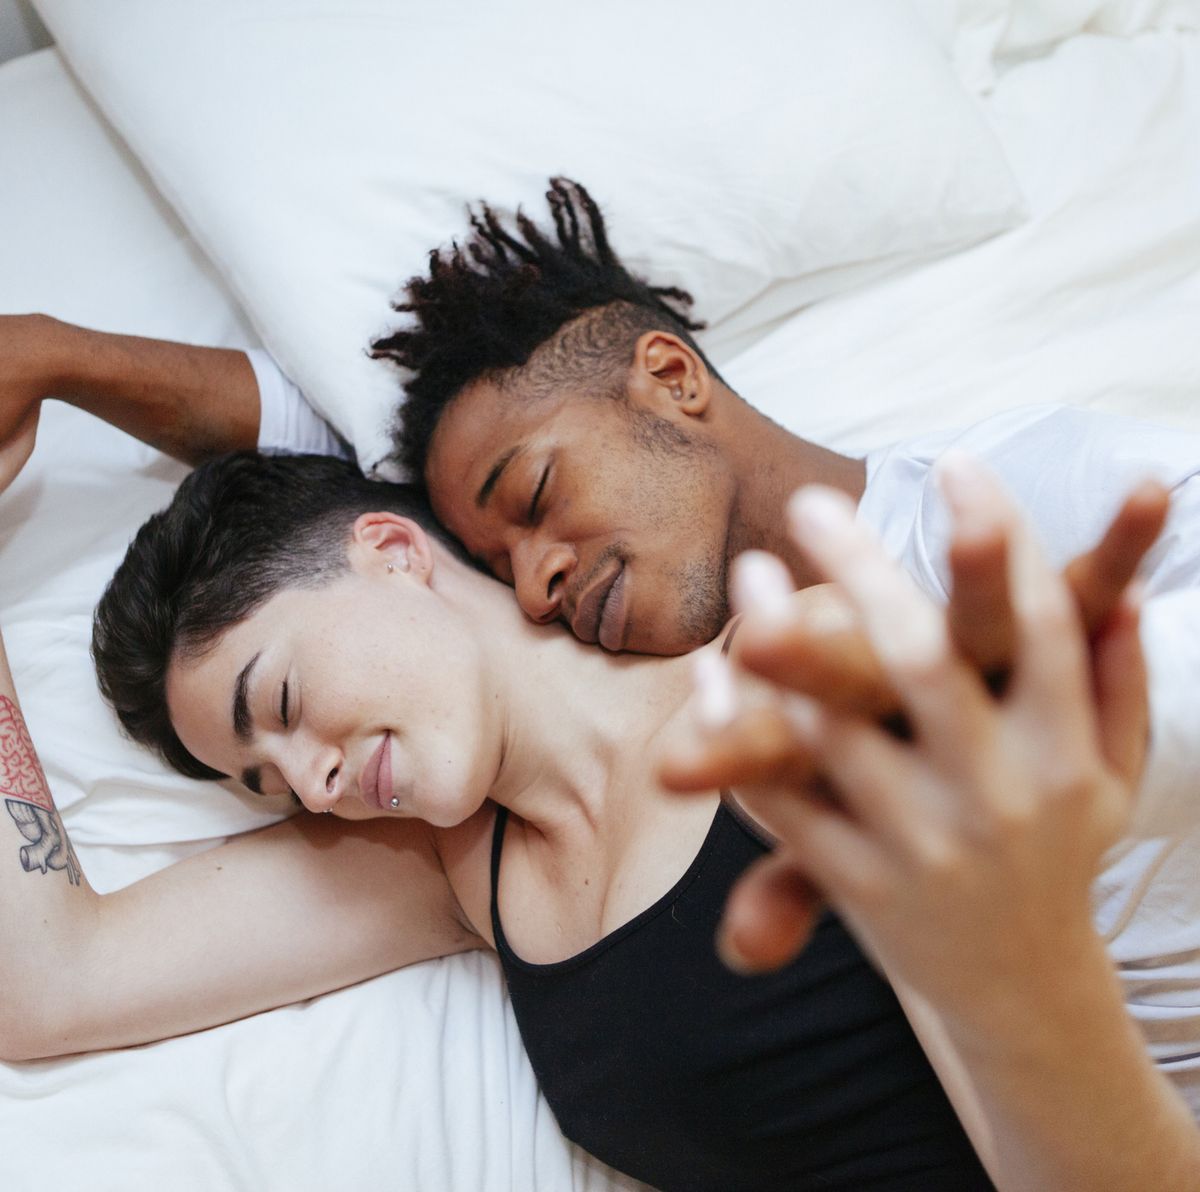 Smal Gp Sex Download - A Sex Therapist Answers 5 of Your Most Pressing Bedroom Questions